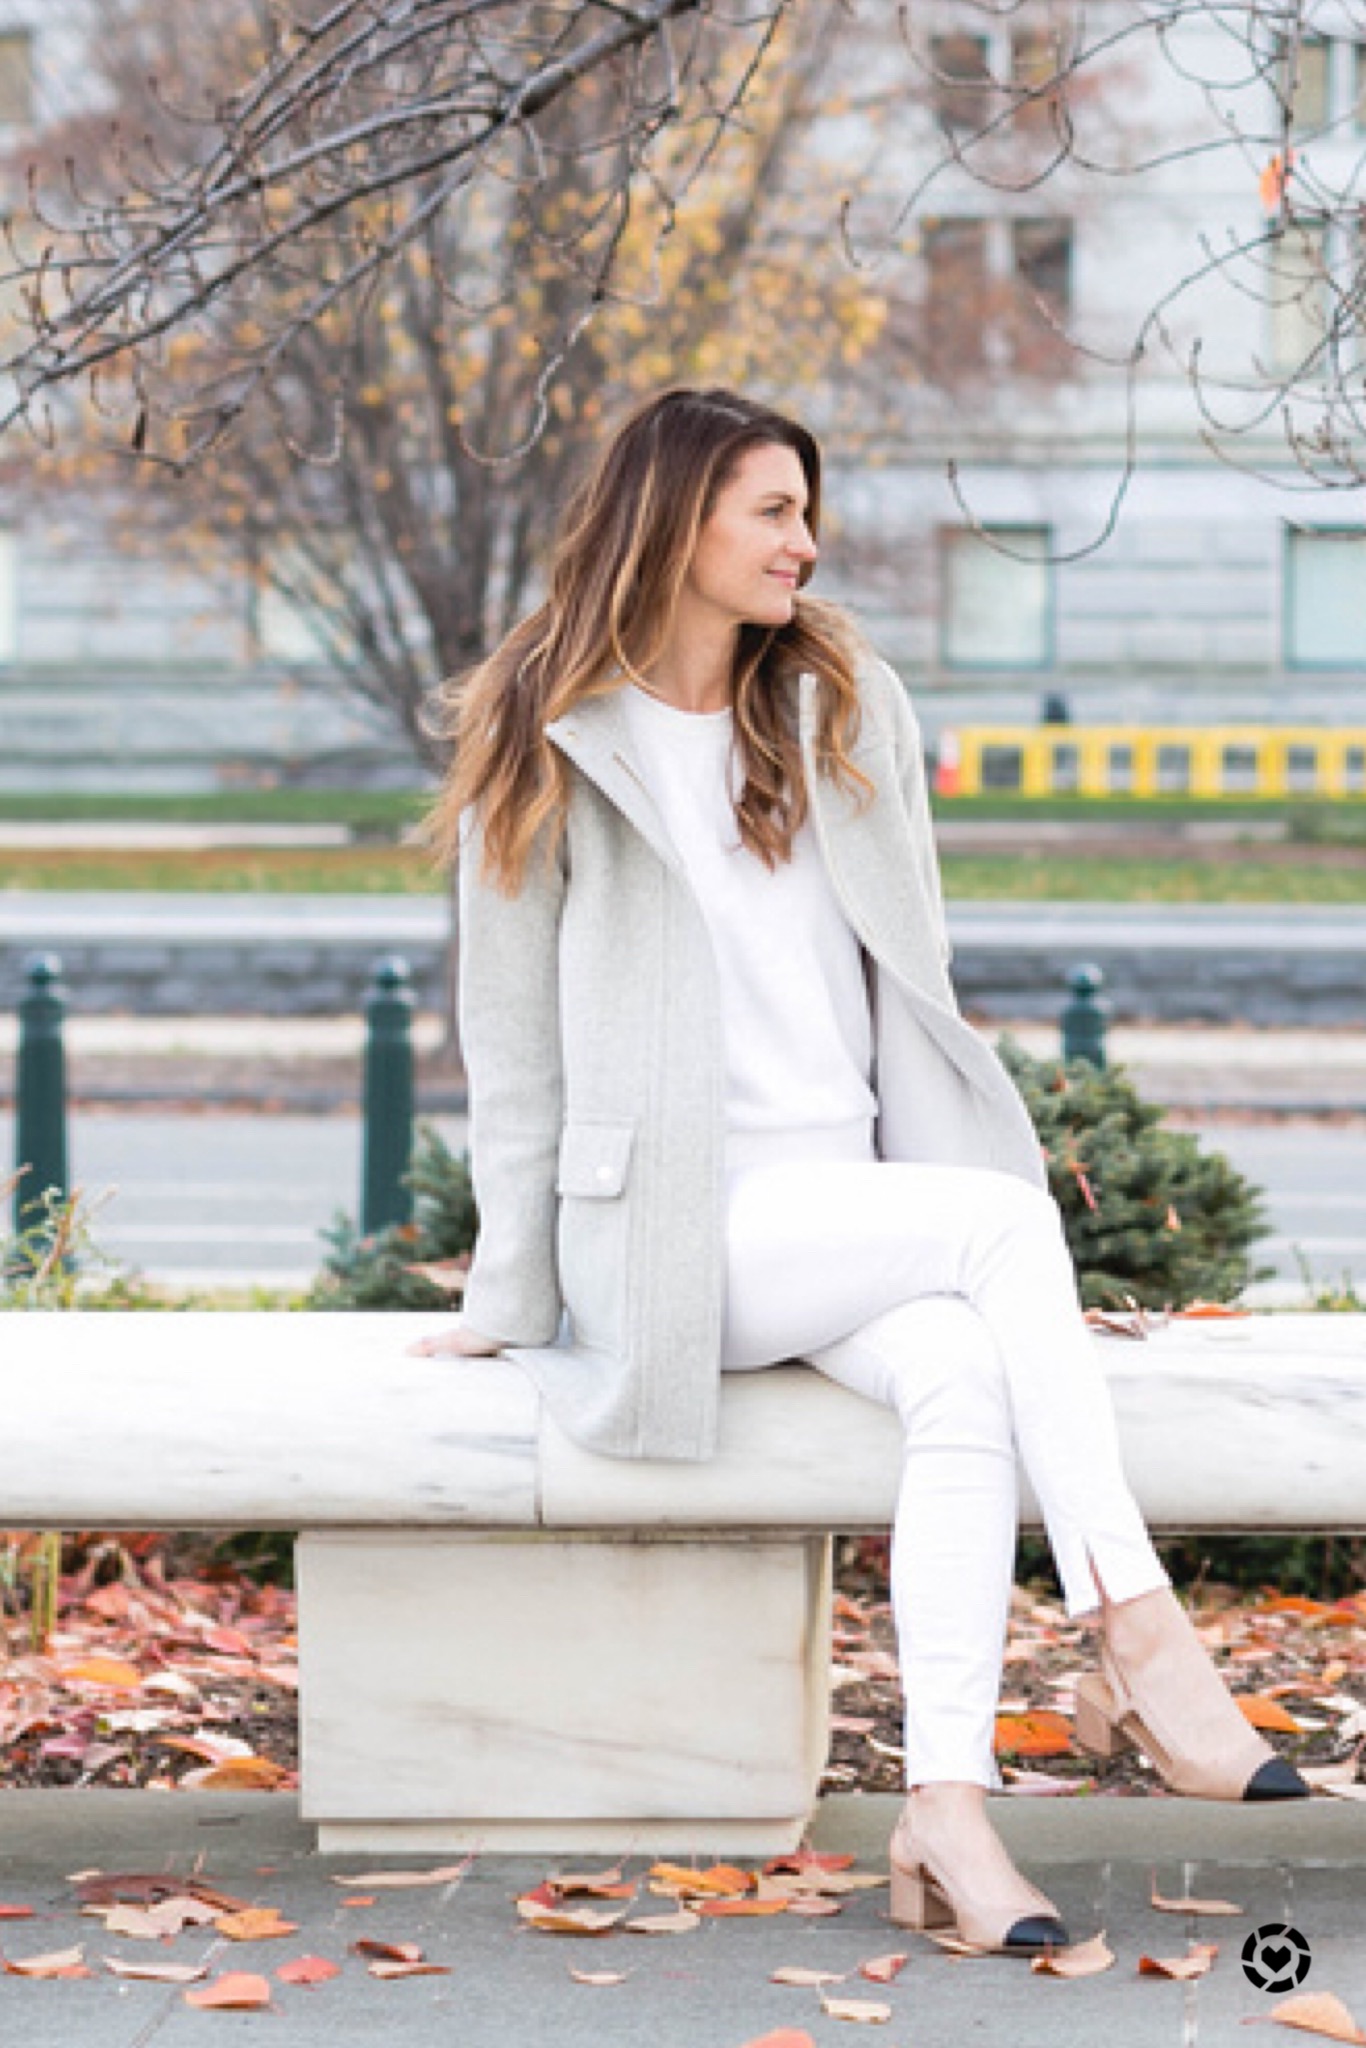 Winter whites, winter neutrals, j crew style, classic outfits, grey and white outfit, what to wear in December, winter coats, how to wear white in December 